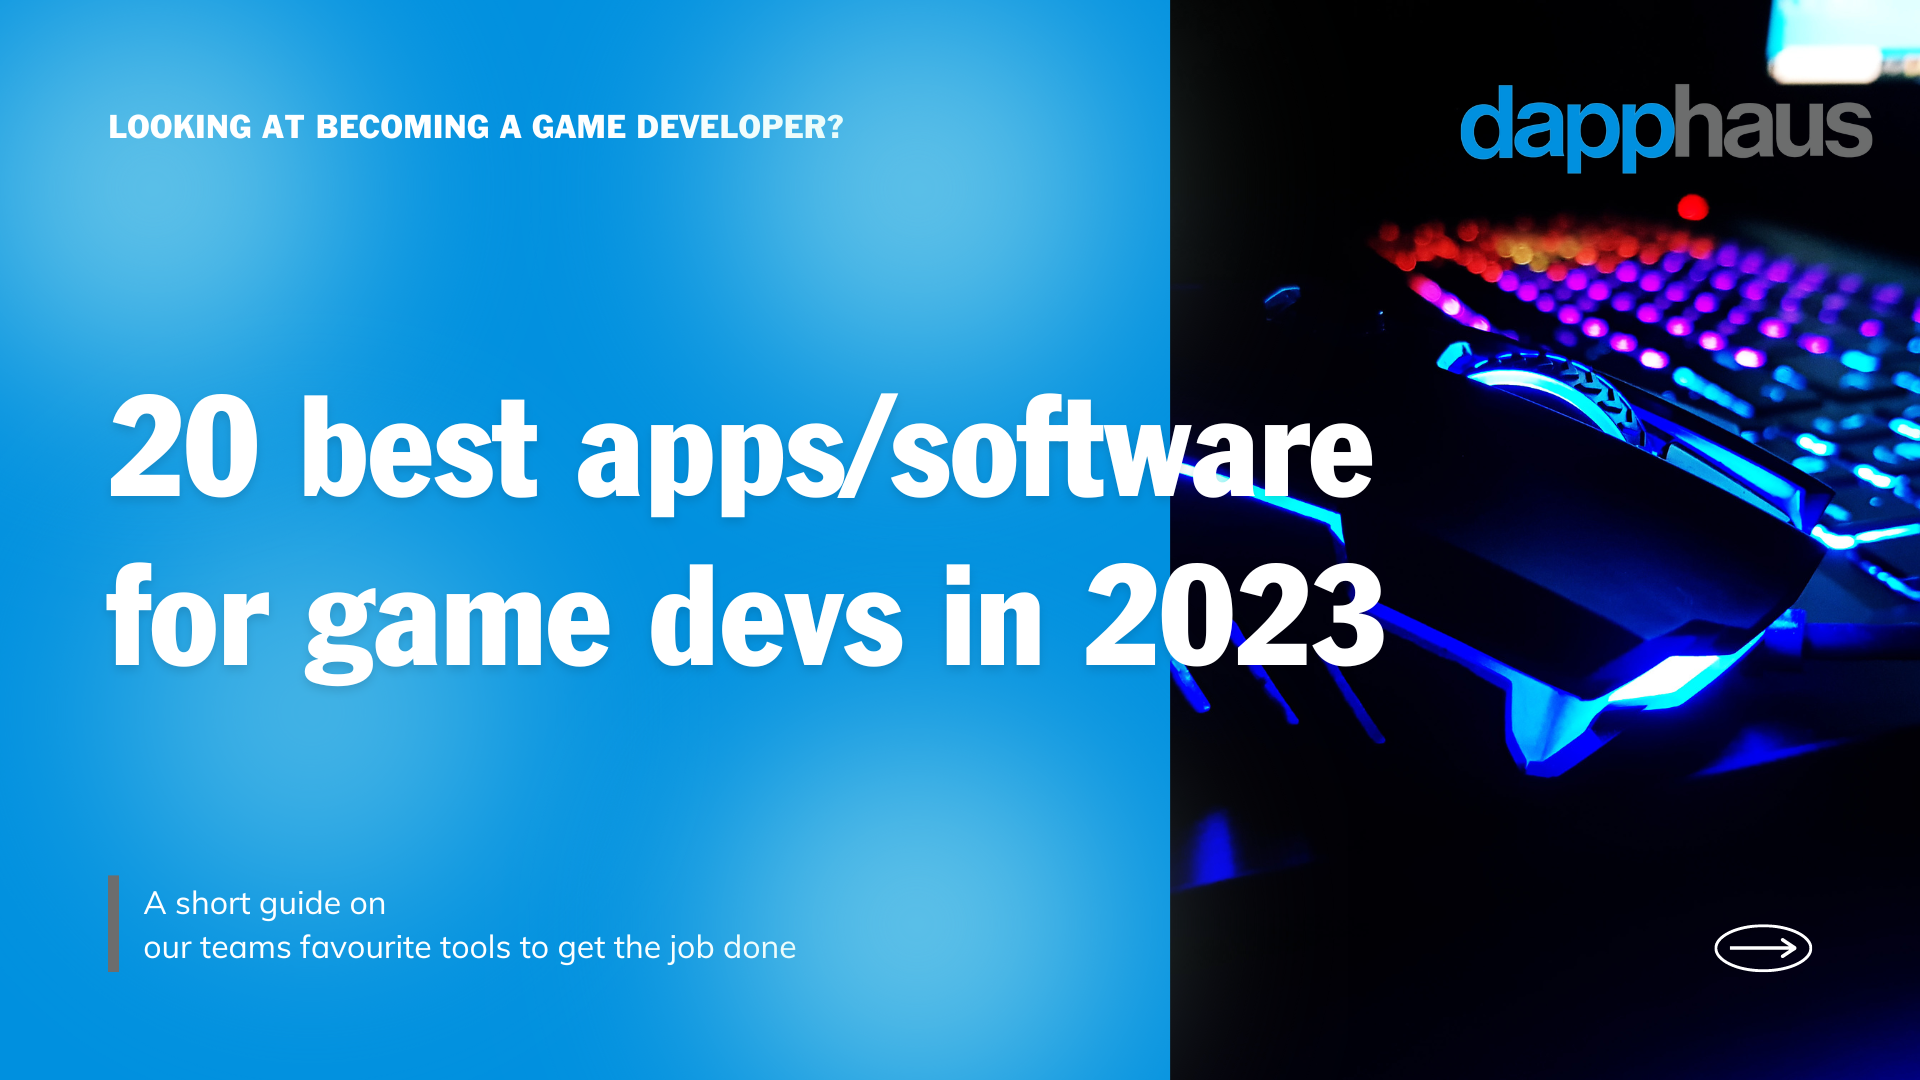 9 Best Game Making Software For Beginners in 2023